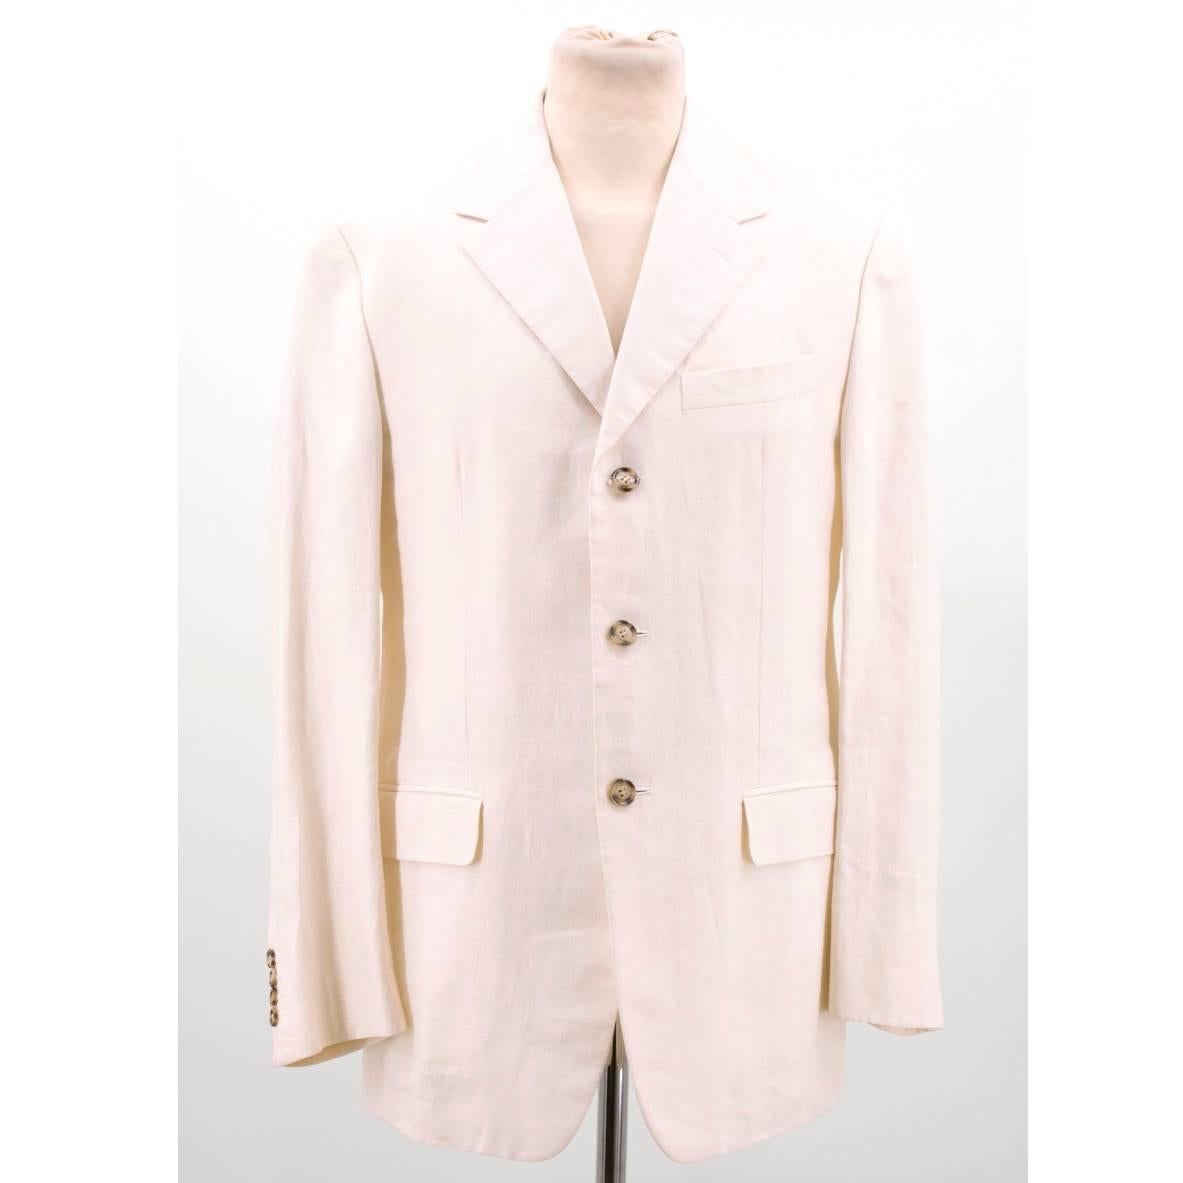 Prada cream linen suit with a single-breasted jacket and straight leg trousers. 

Size:
Measurements: Approx. Trousers: Length - 105cm Inseam - 80cm Waist - 41cm Jacket: Length - 79cm Chest - 54cm Sleeve - 45cm

Conditions Details : 9.5/10

* Please